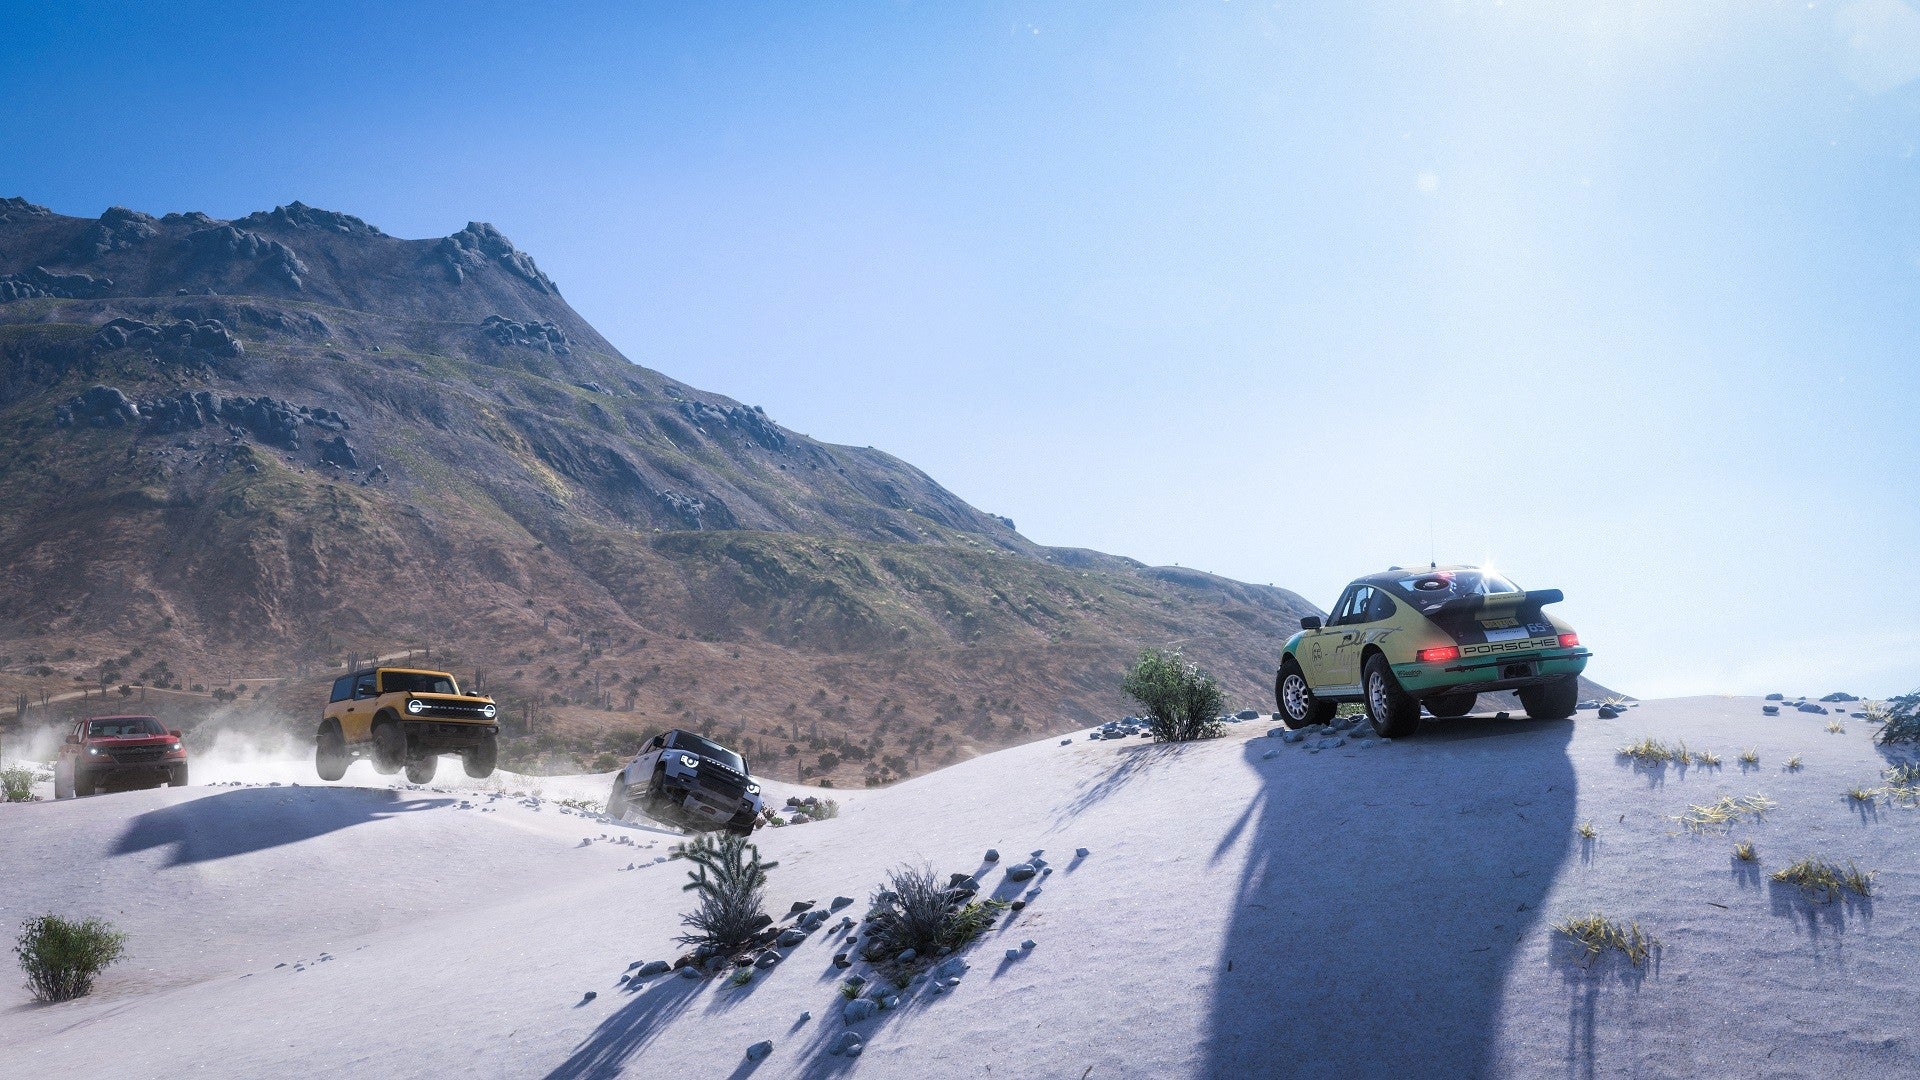 A car parks on a snowy mountain top in Forza Horizon 5